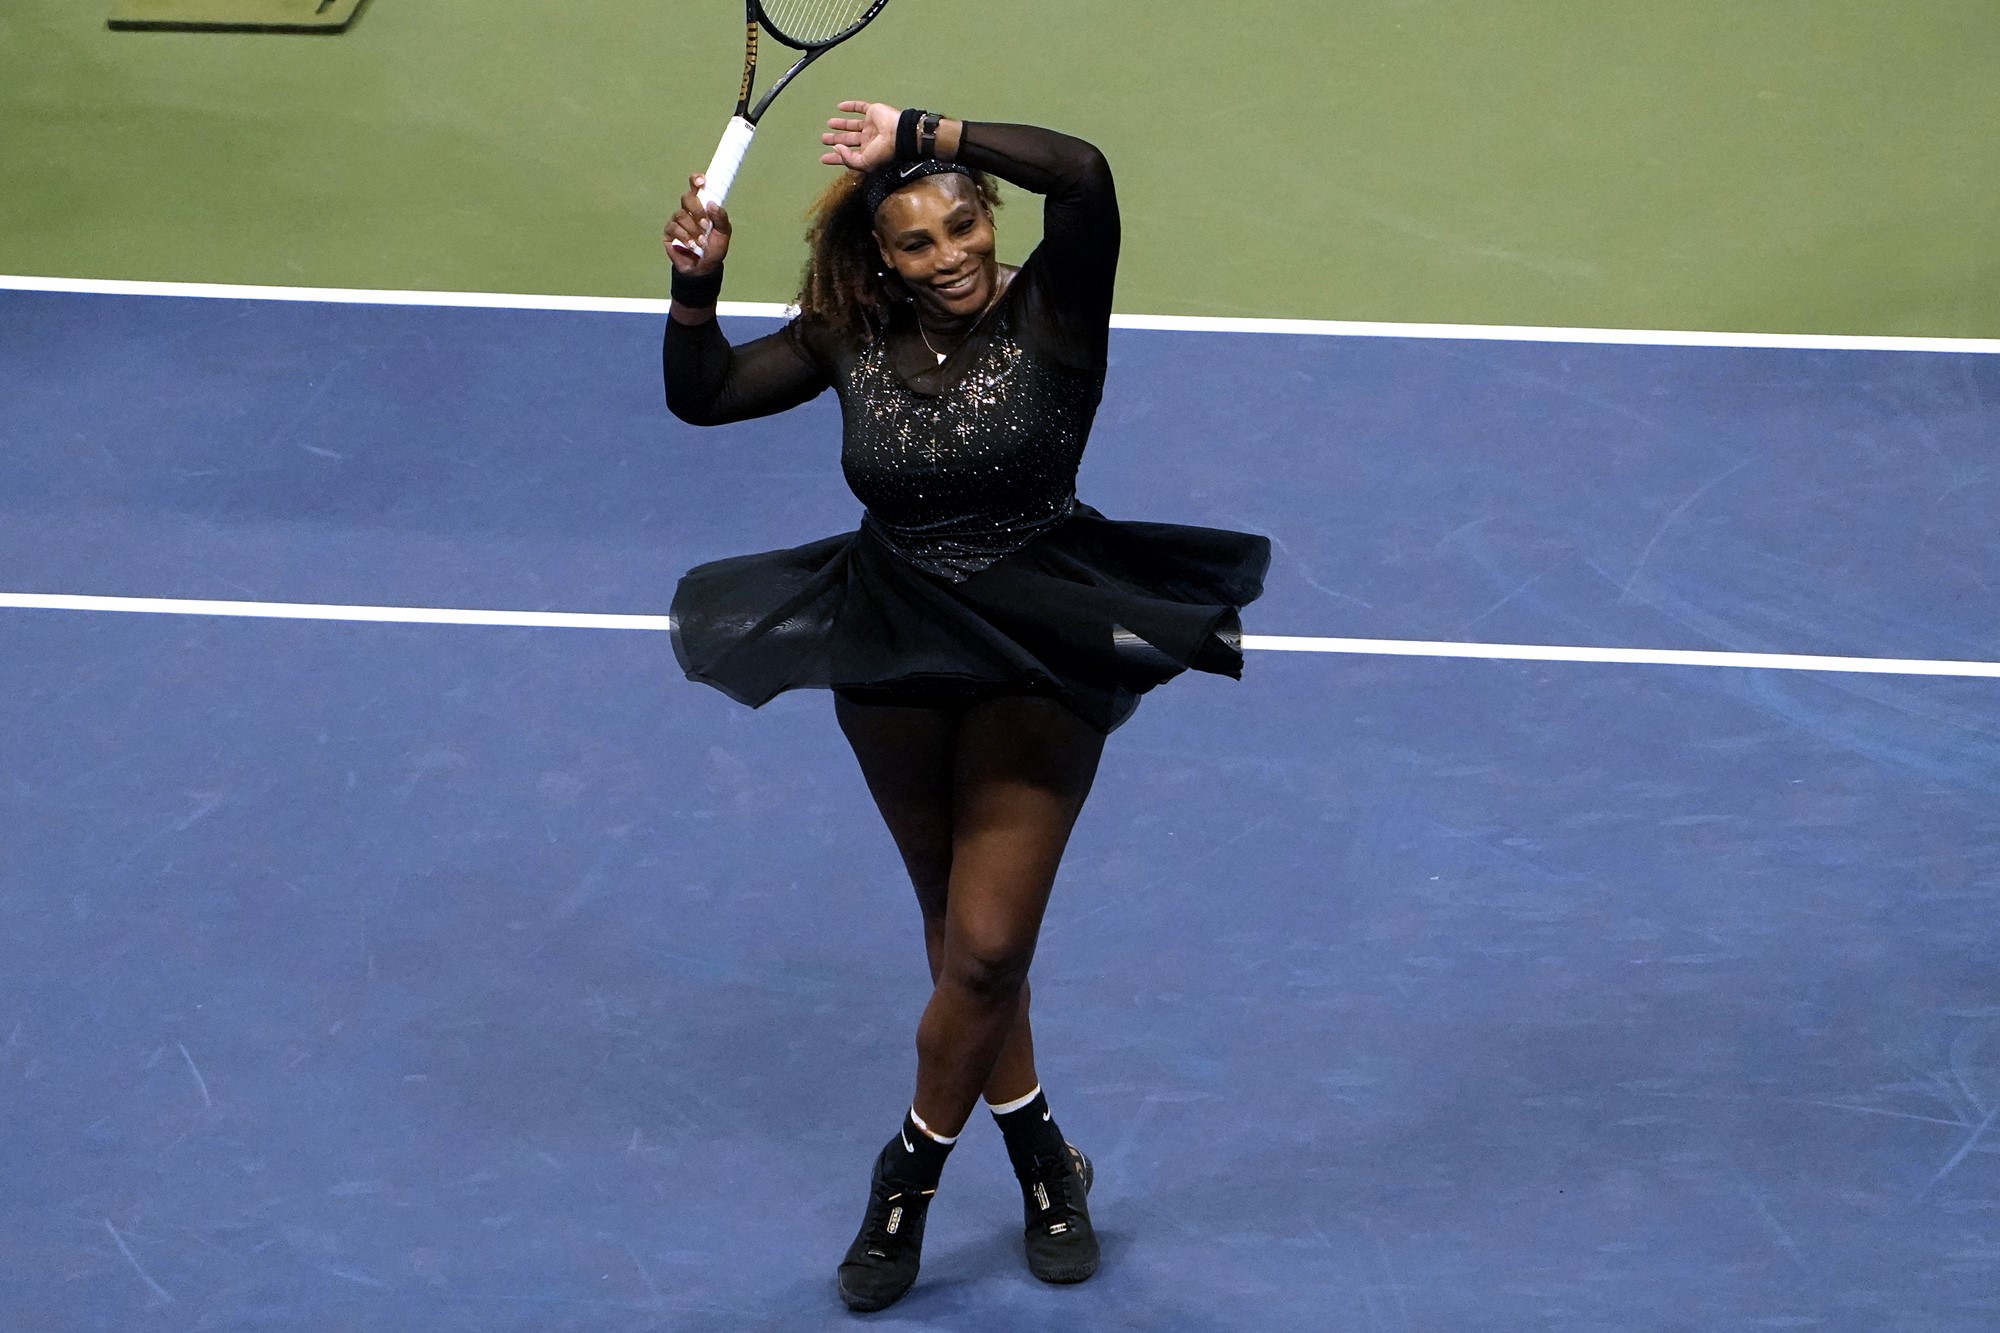 Serena Williams celebrates after winning her match at the US Open.